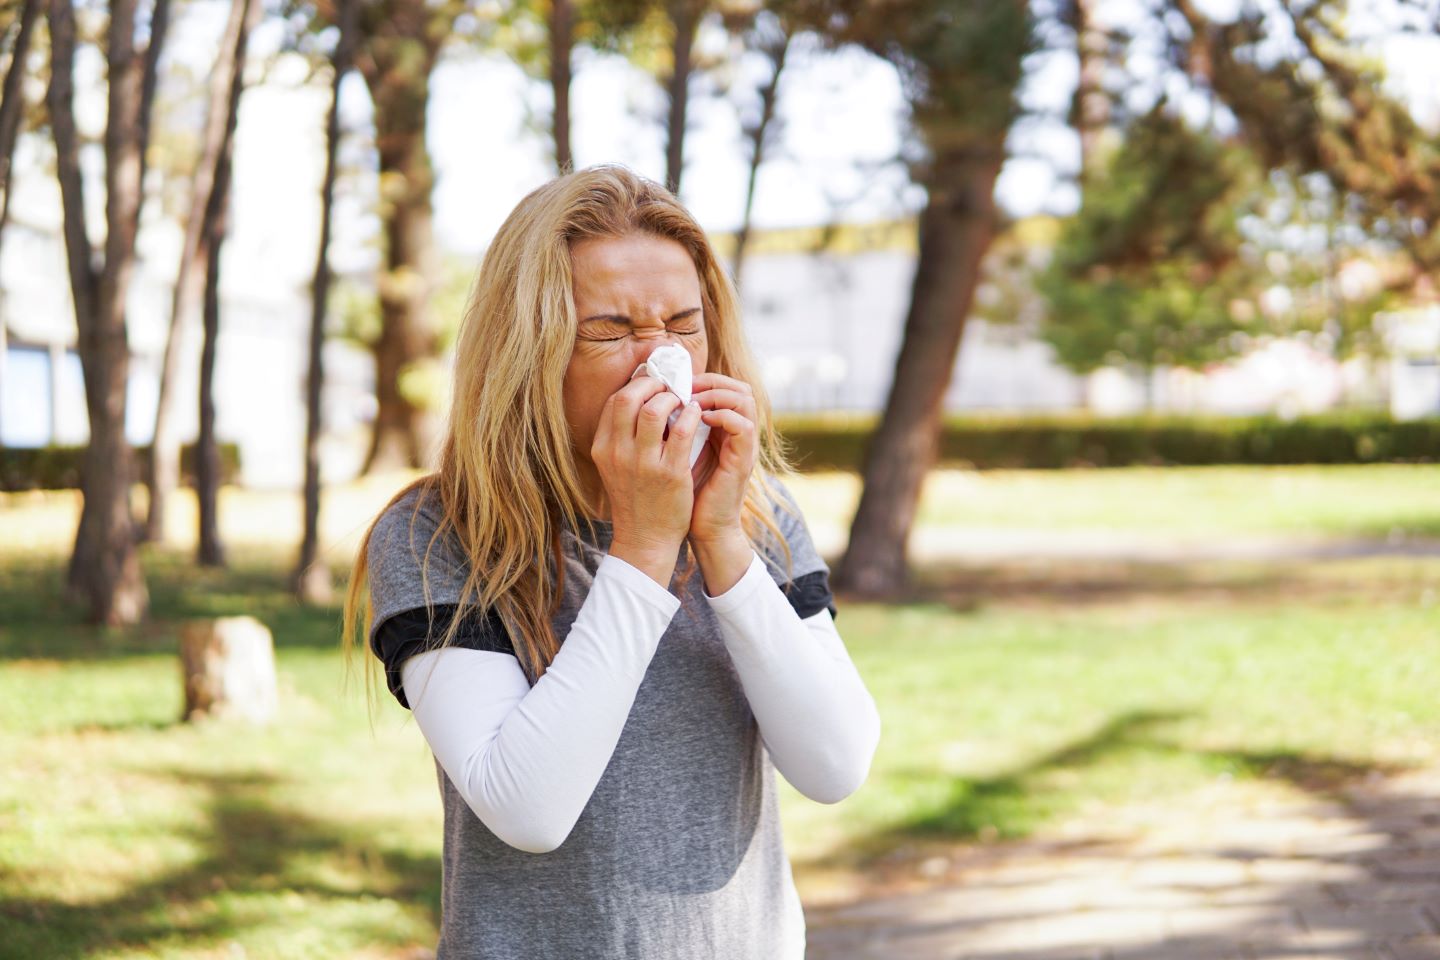 Woman suffering from spring allergy, blowing nose with a tissue in the parkWoman suffering from spring allergy, blowing nose with a tissue in the park